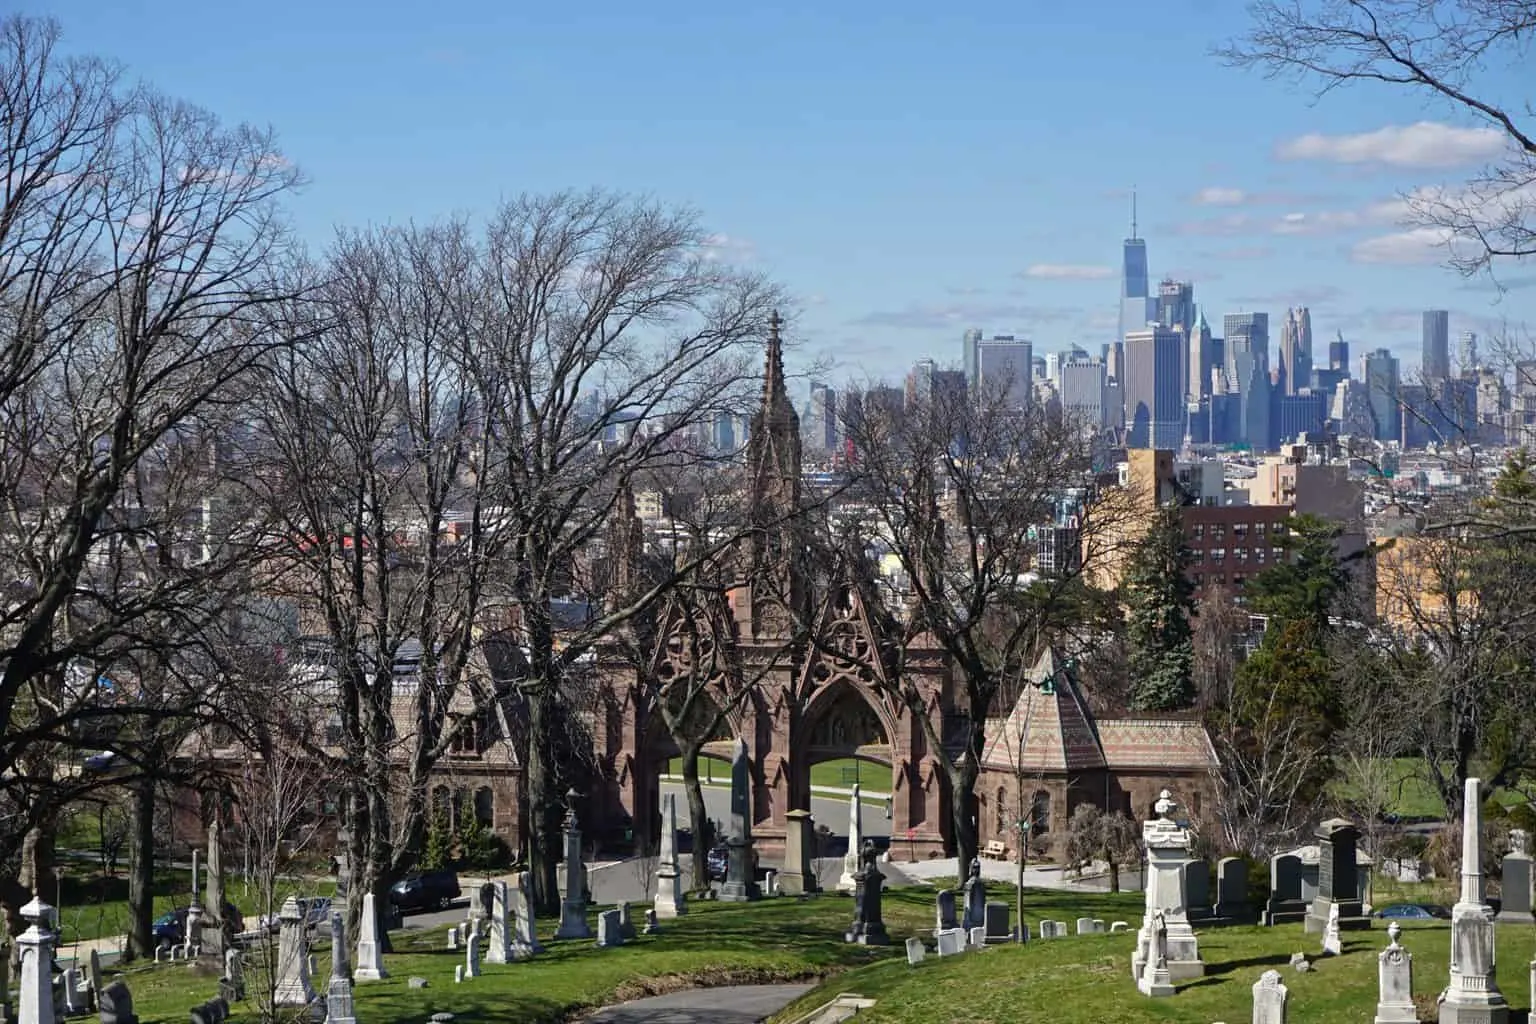 A stunning view of Manhattan from Green-wood Cemetery in Brooklyn.